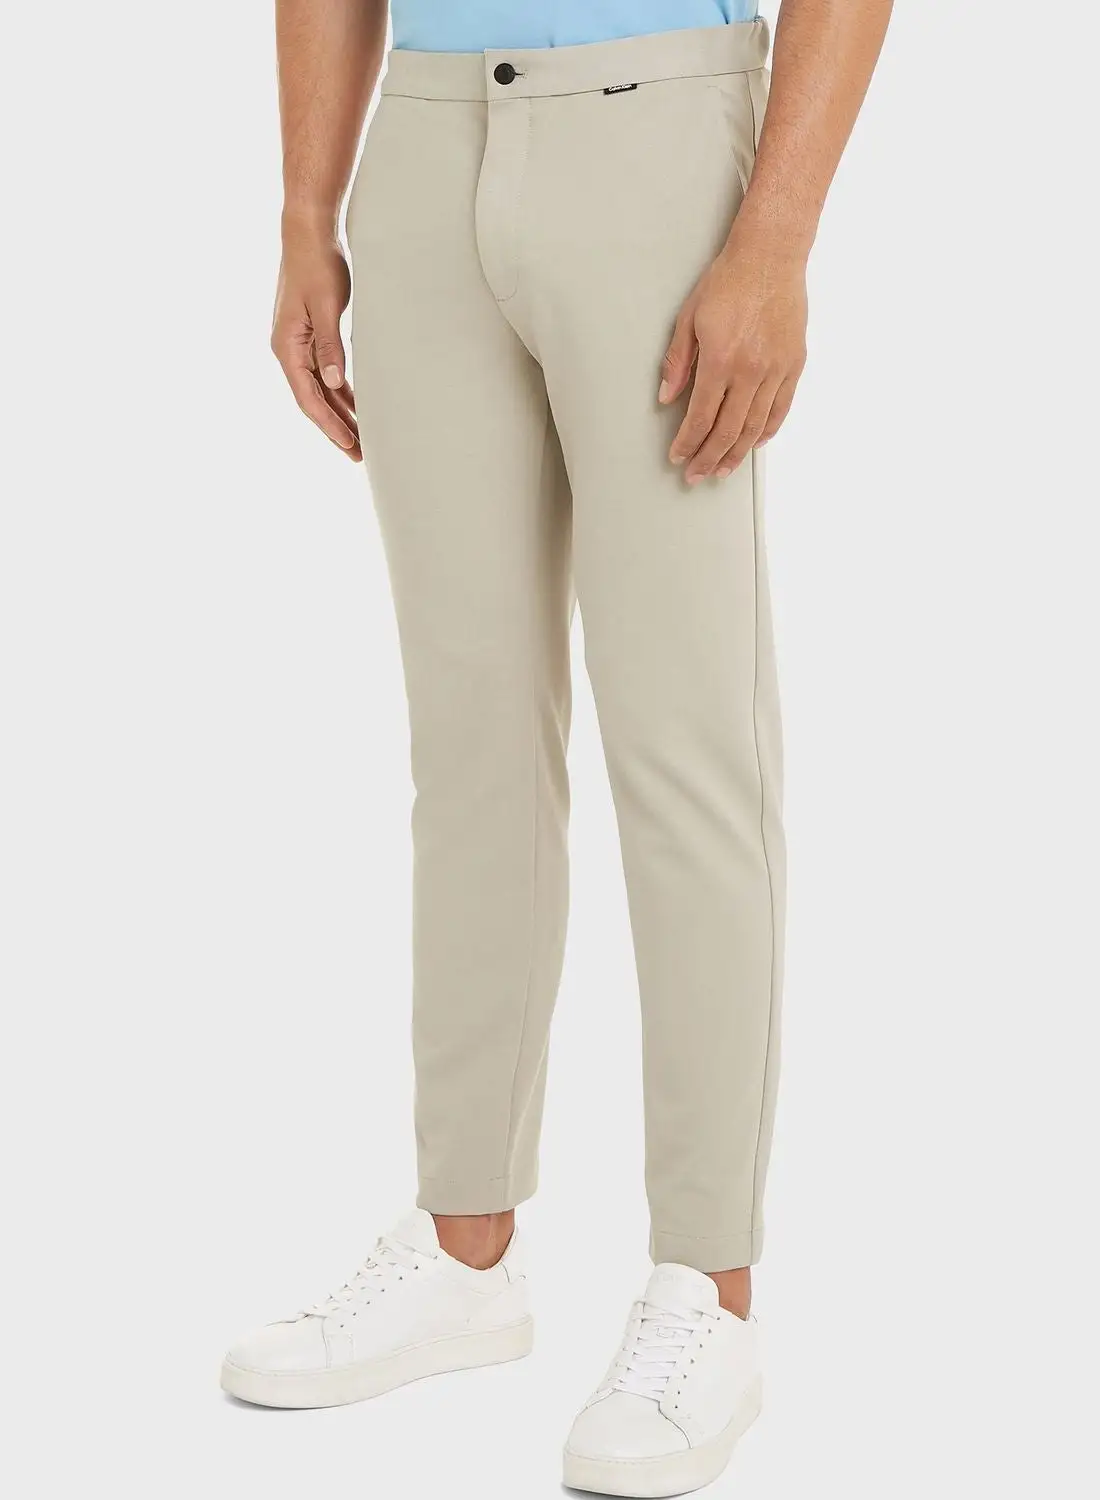 CALVIN KLEIN Comfort Knit Tapered Pants